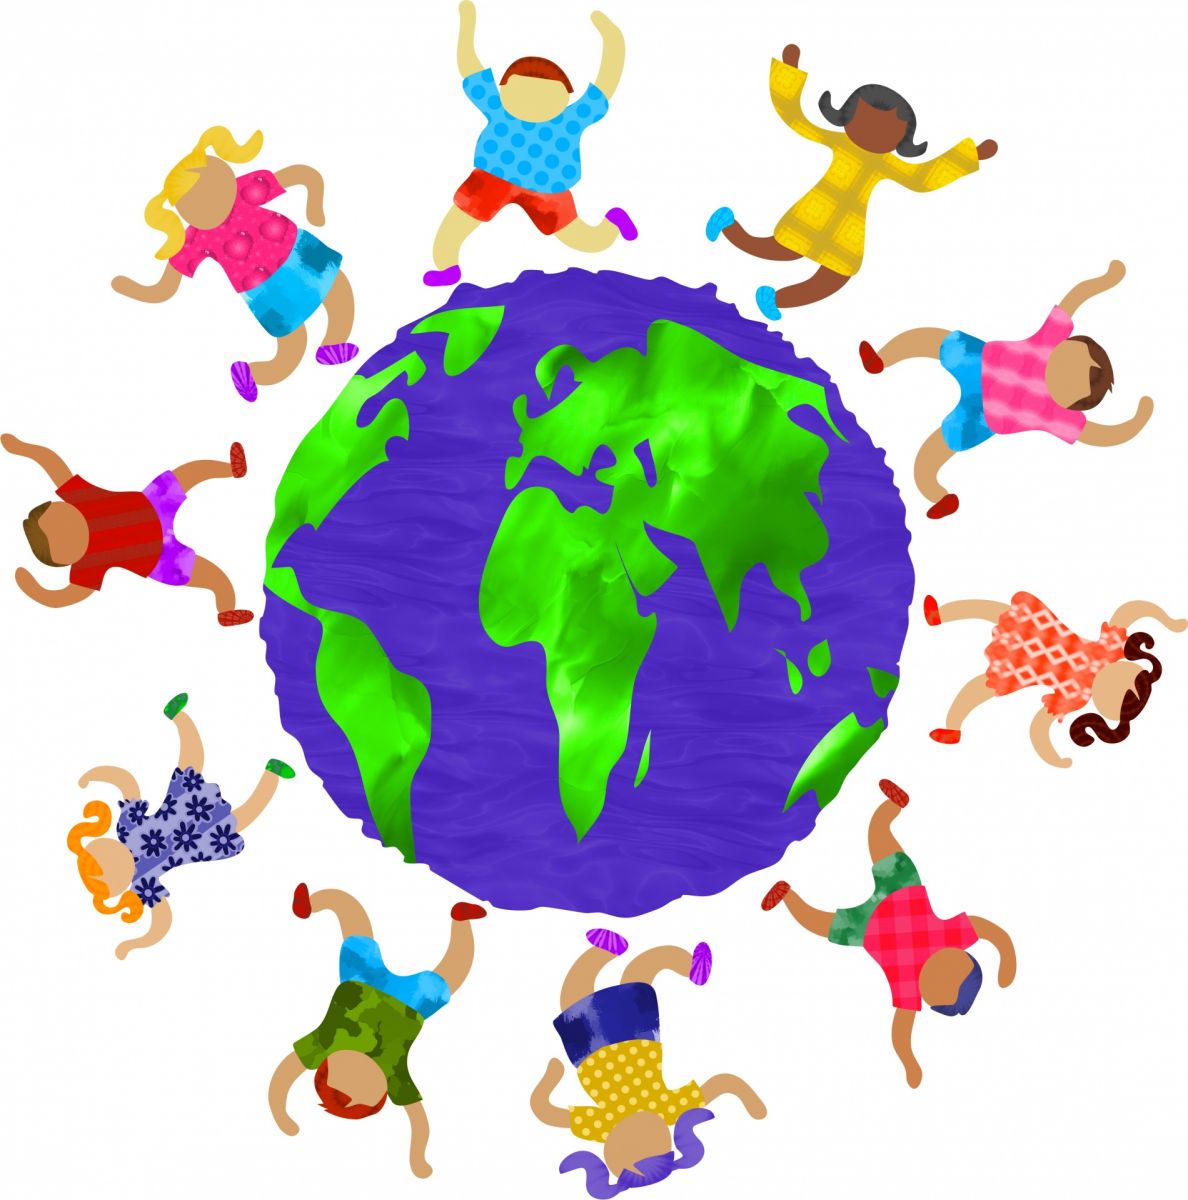 Children of all races and genders dance around a globe.